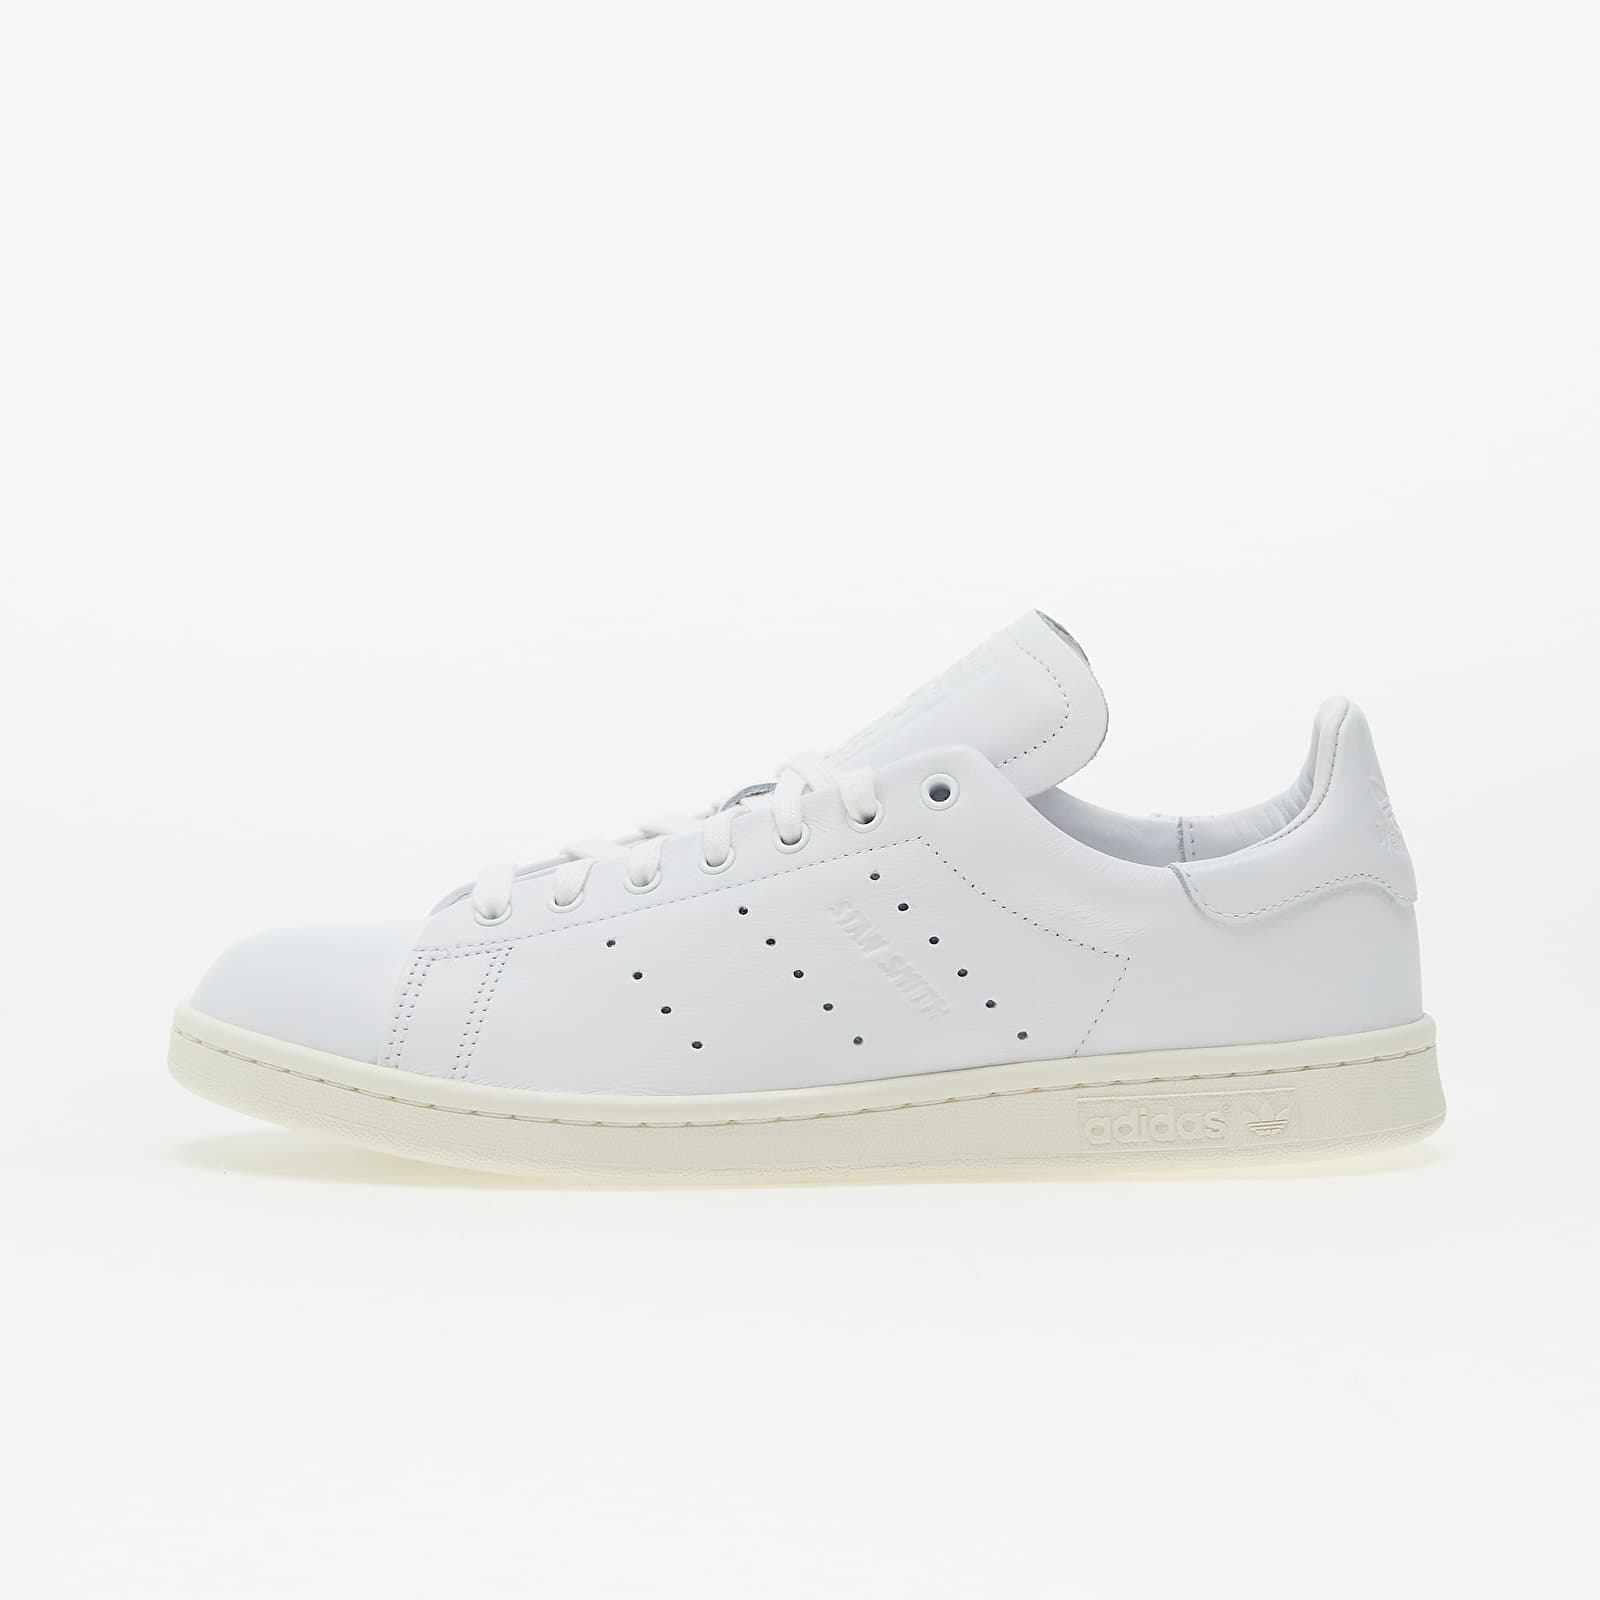 Men's sneakers and shoes adidas Stan Smith Lux Ftw White/ Ftw White/ Off White